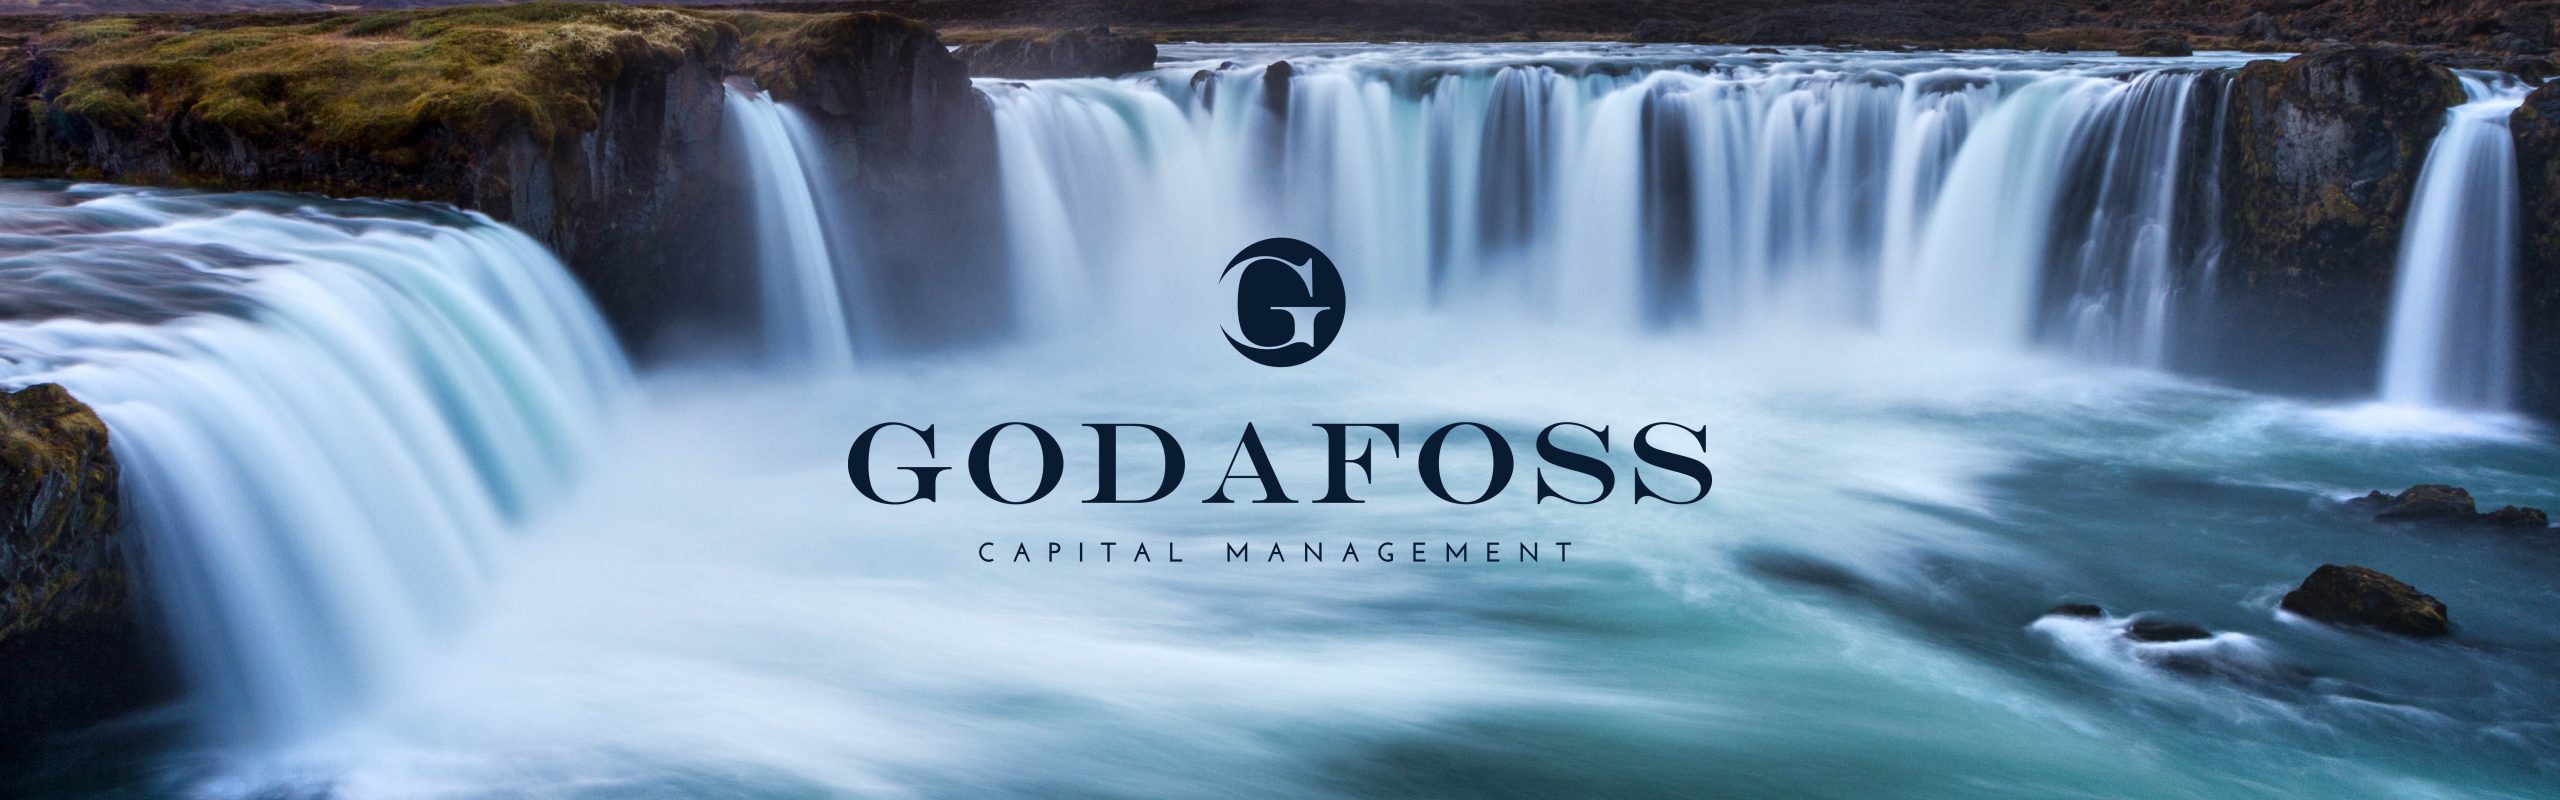 A panoramic view of the Goðafoss waterfall with flowing cascades over a rocky ledge, overlaid with the text "Godafoss Capital Management" and a company logo in the center.